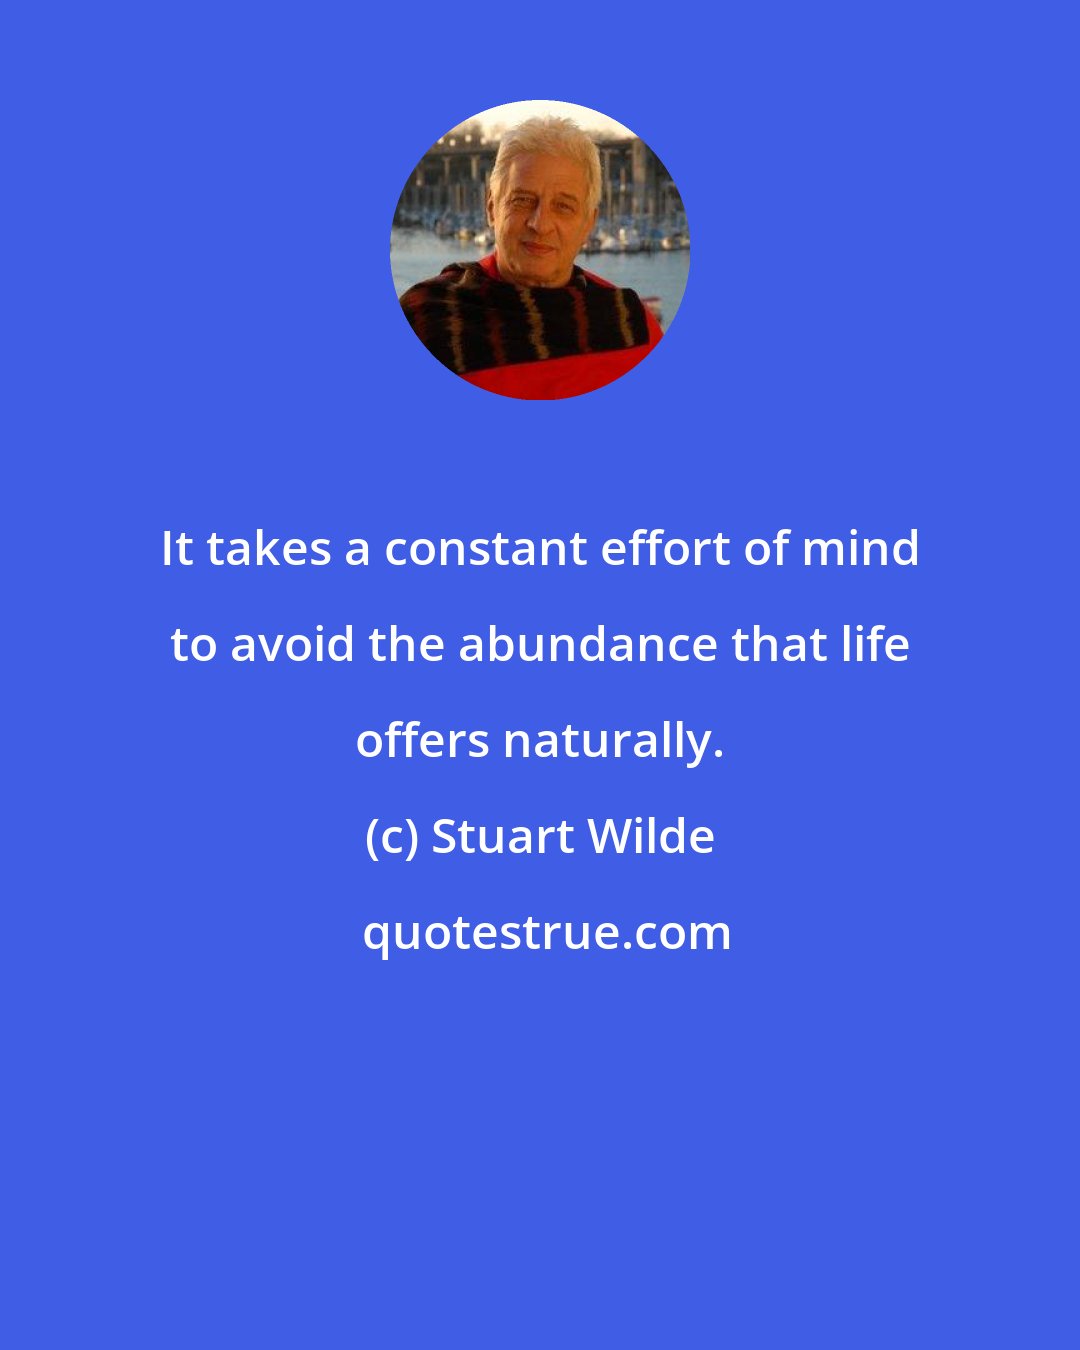 Stuart Wilde: It takes a constant effort of mind to avoid the abundance that life offers naturally.